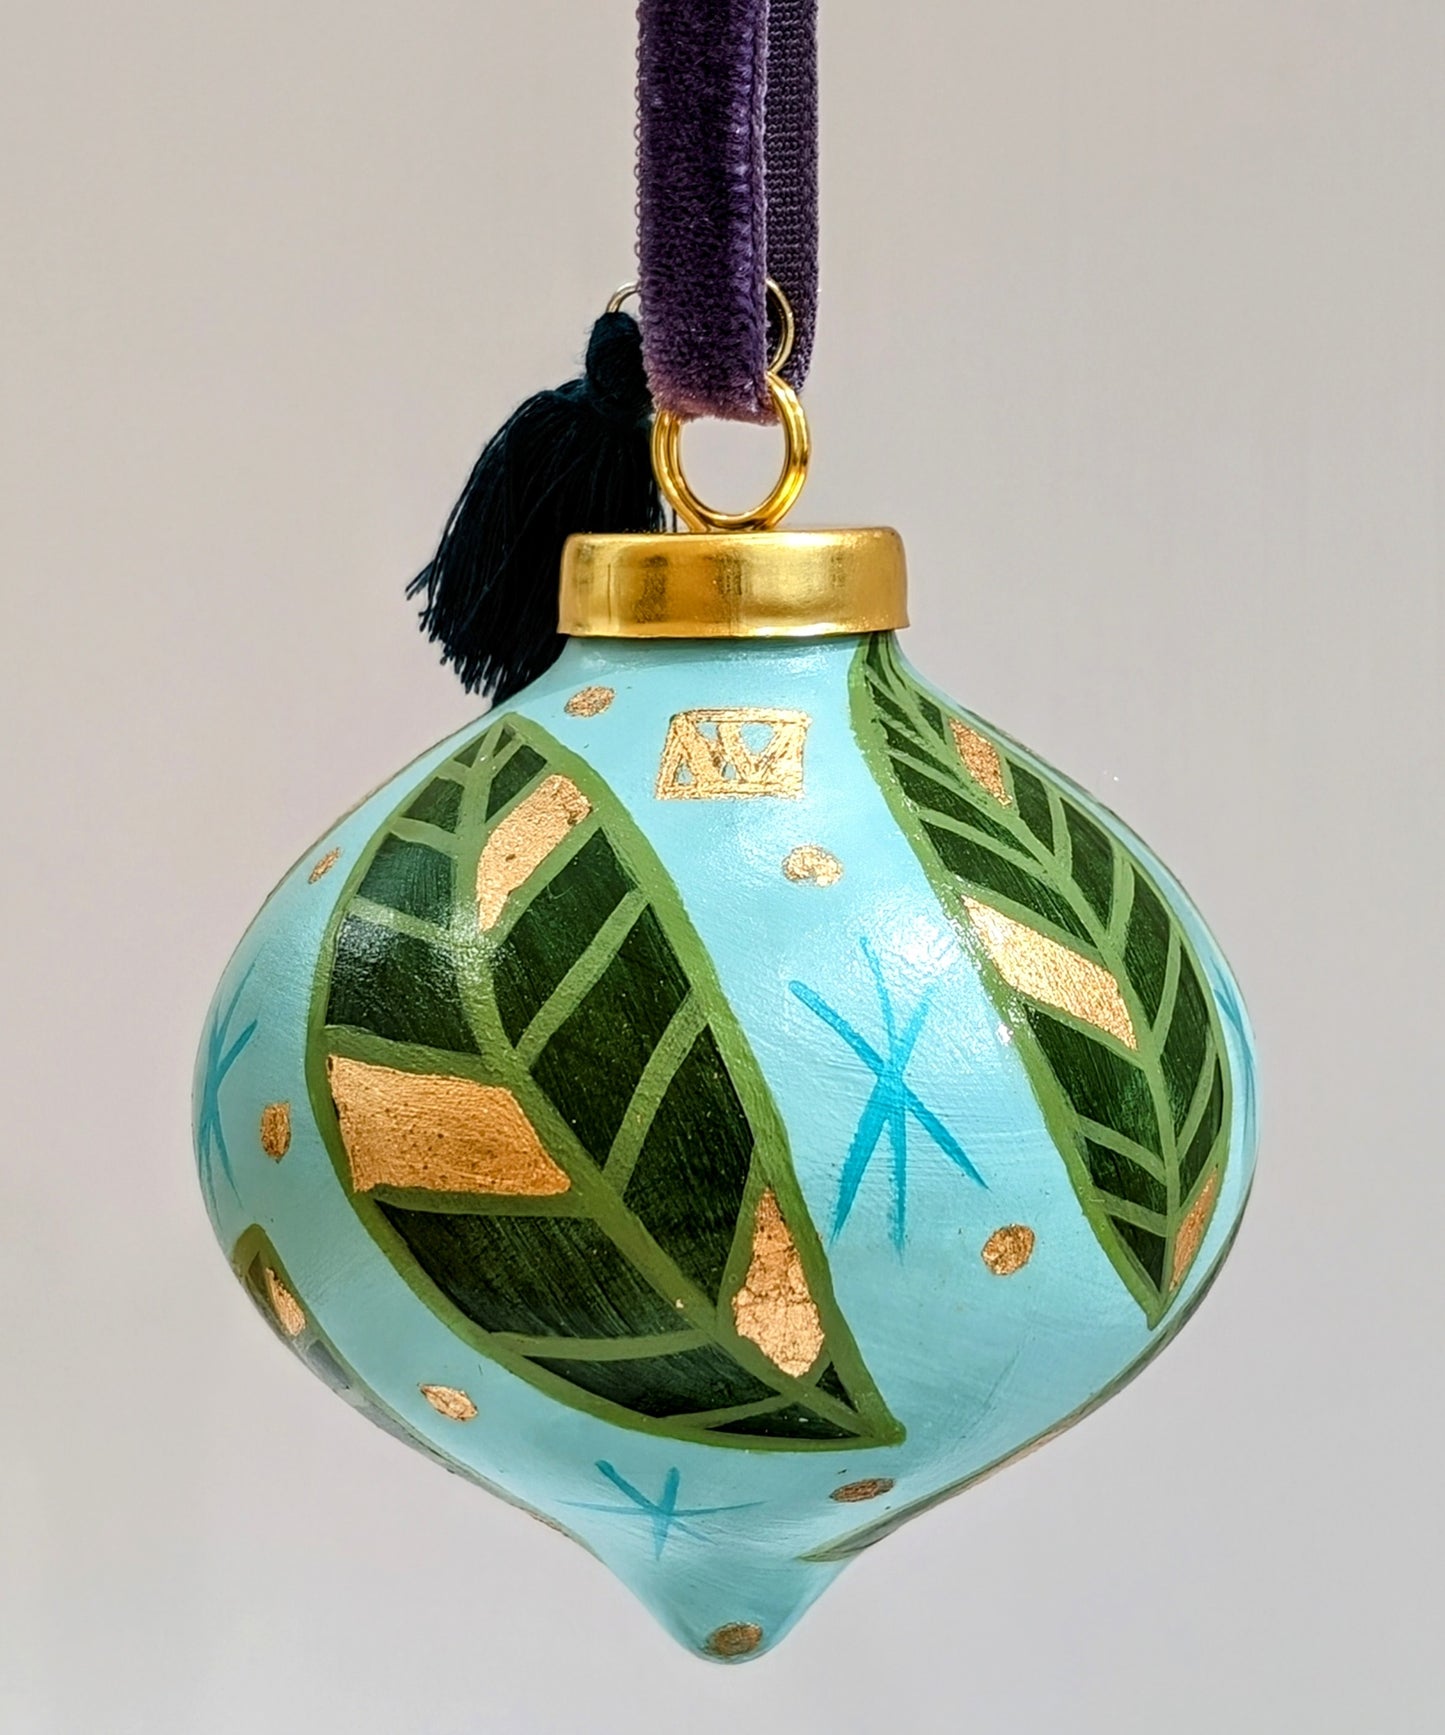 Hand Painted Ceramic Ornament with Gold Leaf Accent